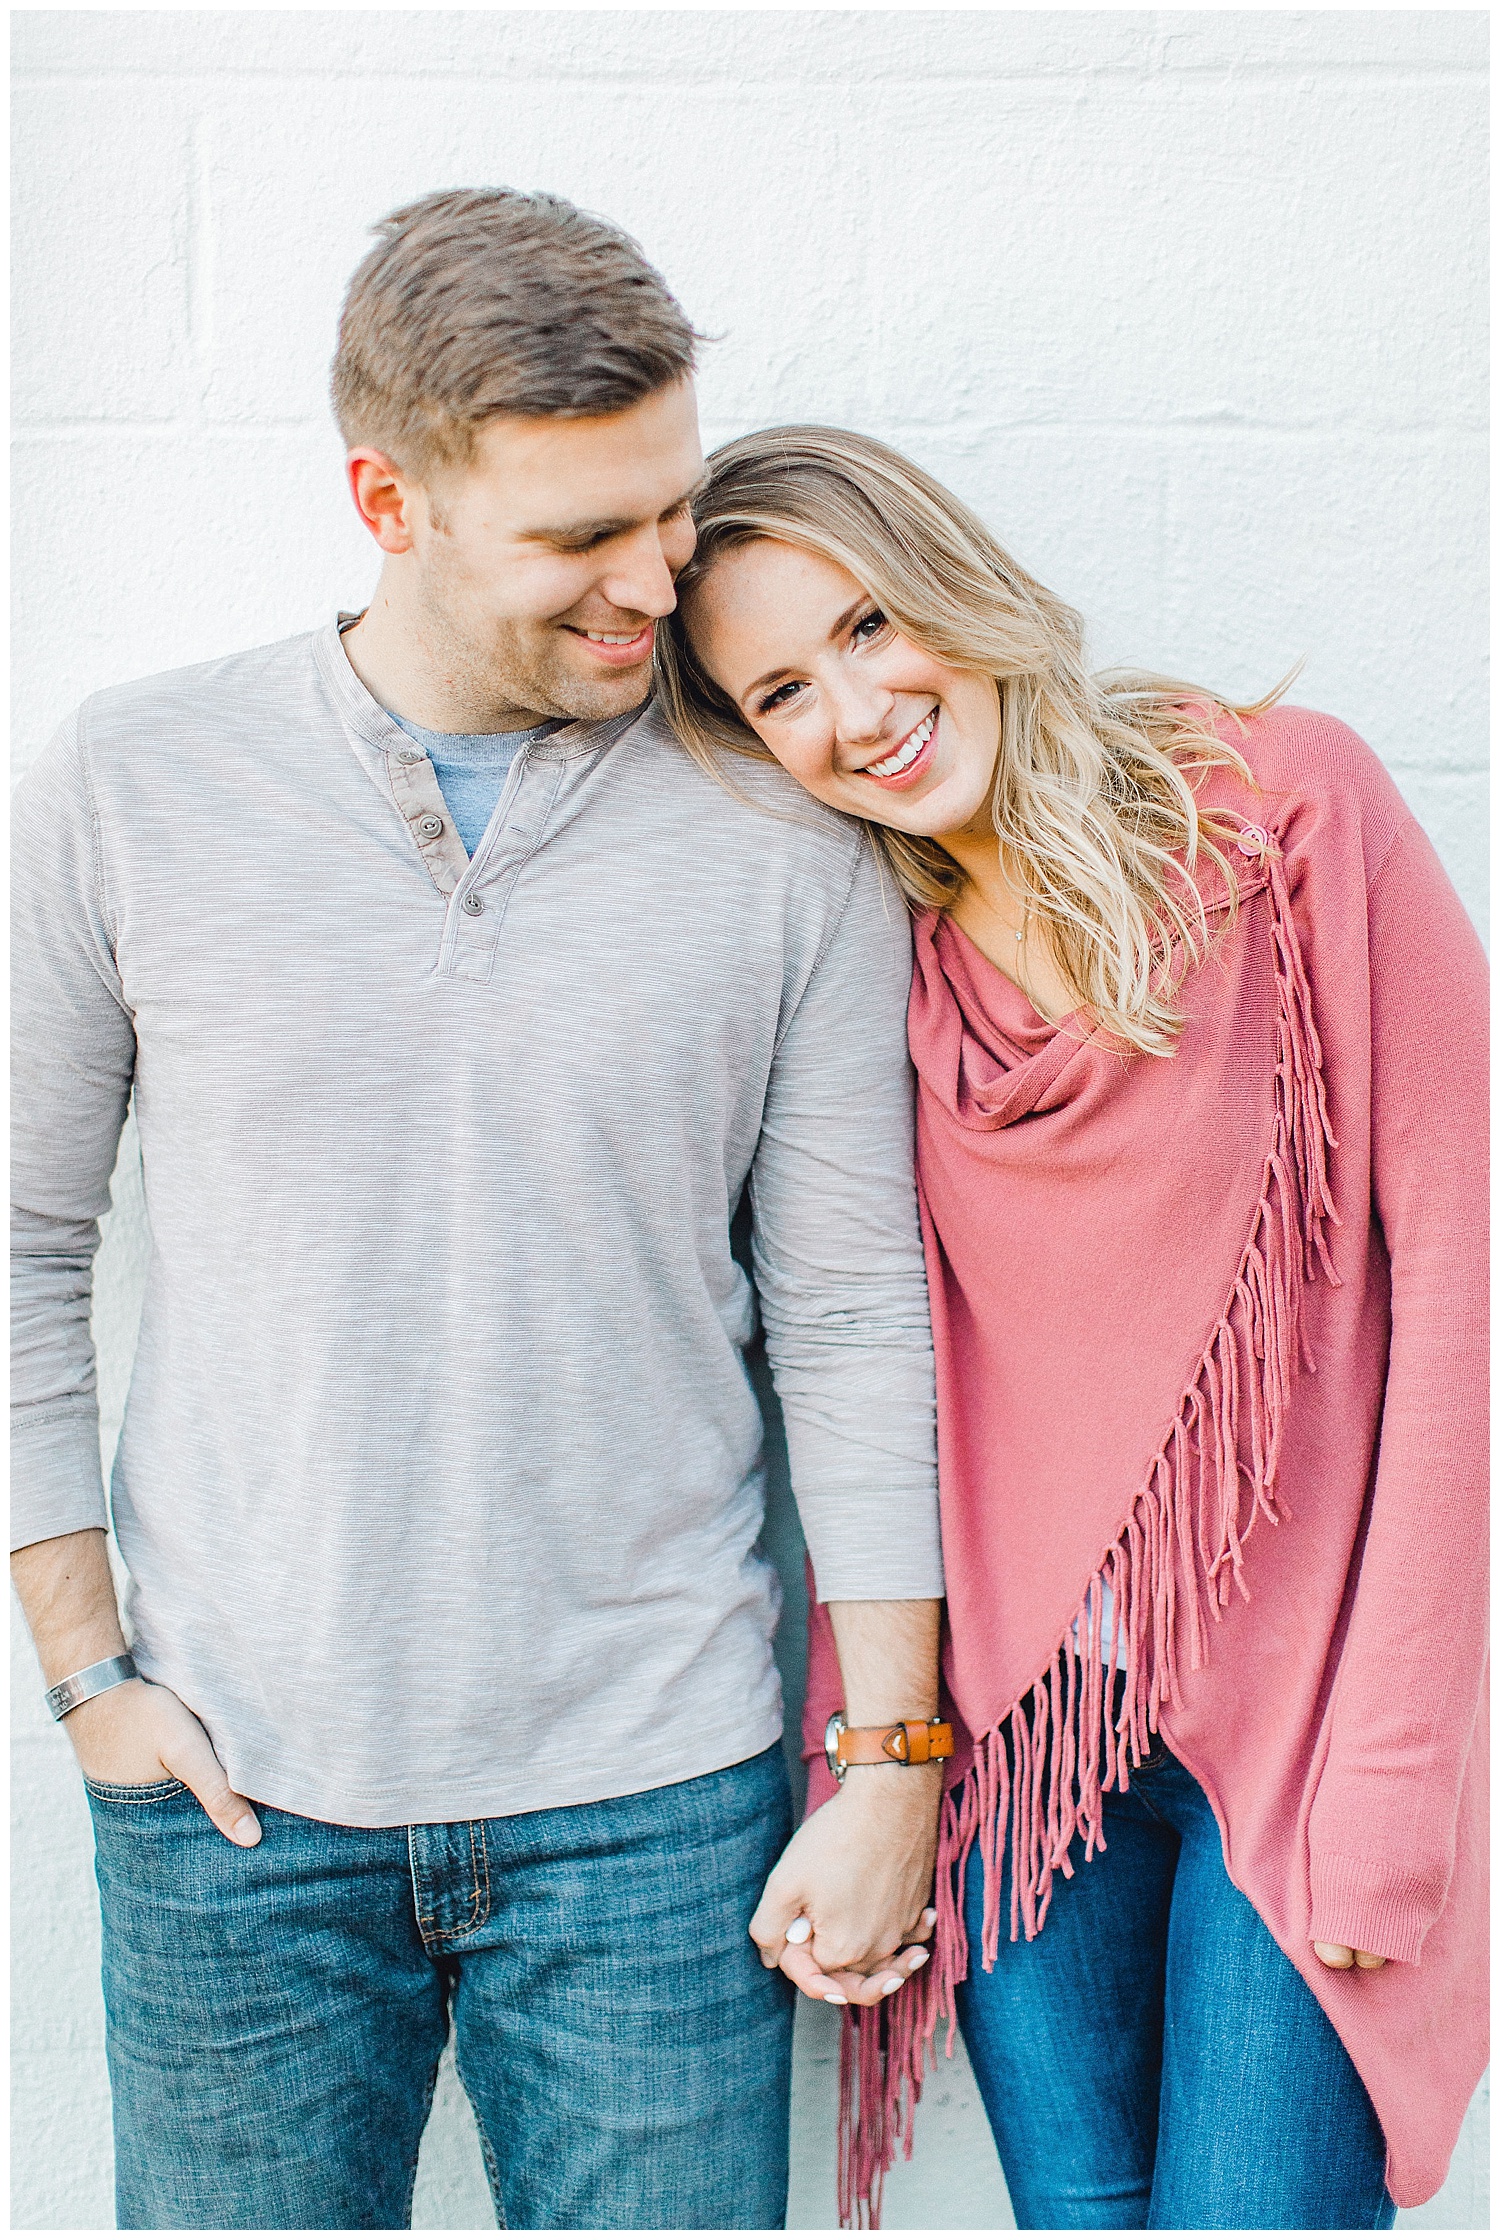 ERC_1061_Downtown Nashville Engagement Session at Barista Parlor | Emma Rose Company Wedding Photographer | Outfit Inspiration for Engagement Session | Kindred Light and Airy Photographer.jpg